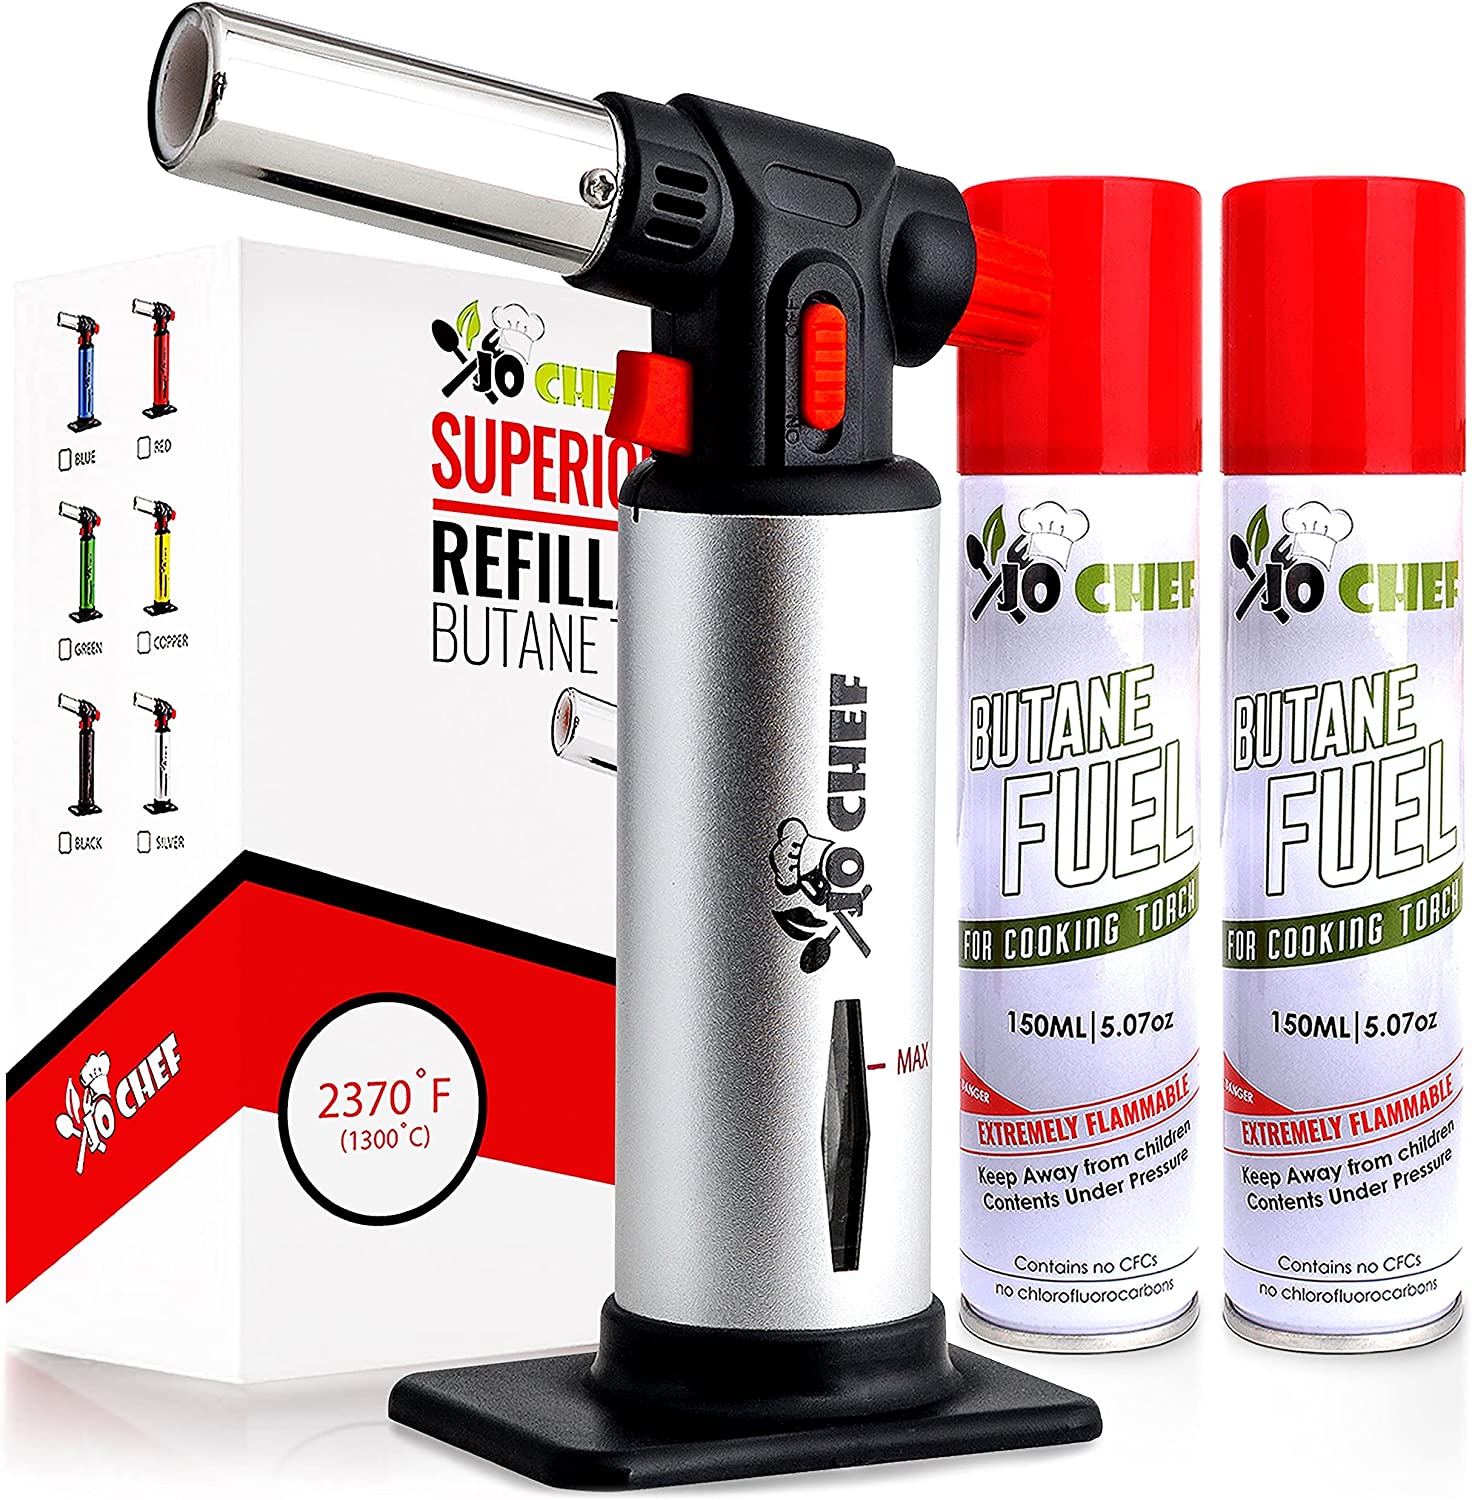 Jo Chef Butane Fuel Canisters & Refillable Cooking Torch